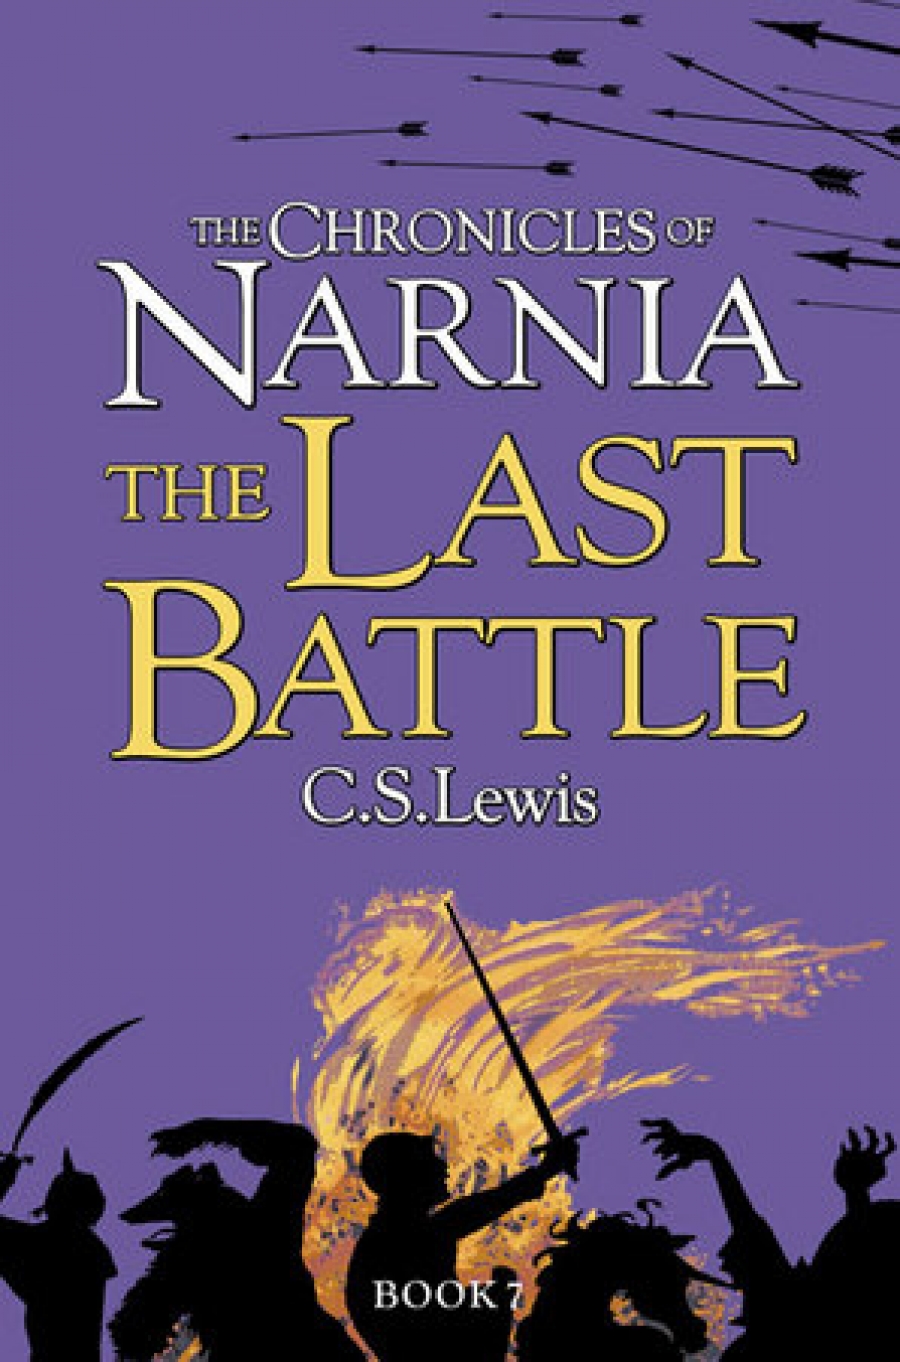 Lewis C. S. Lewis C. S. The Chronicles of Narnia 7. The Last Battle 